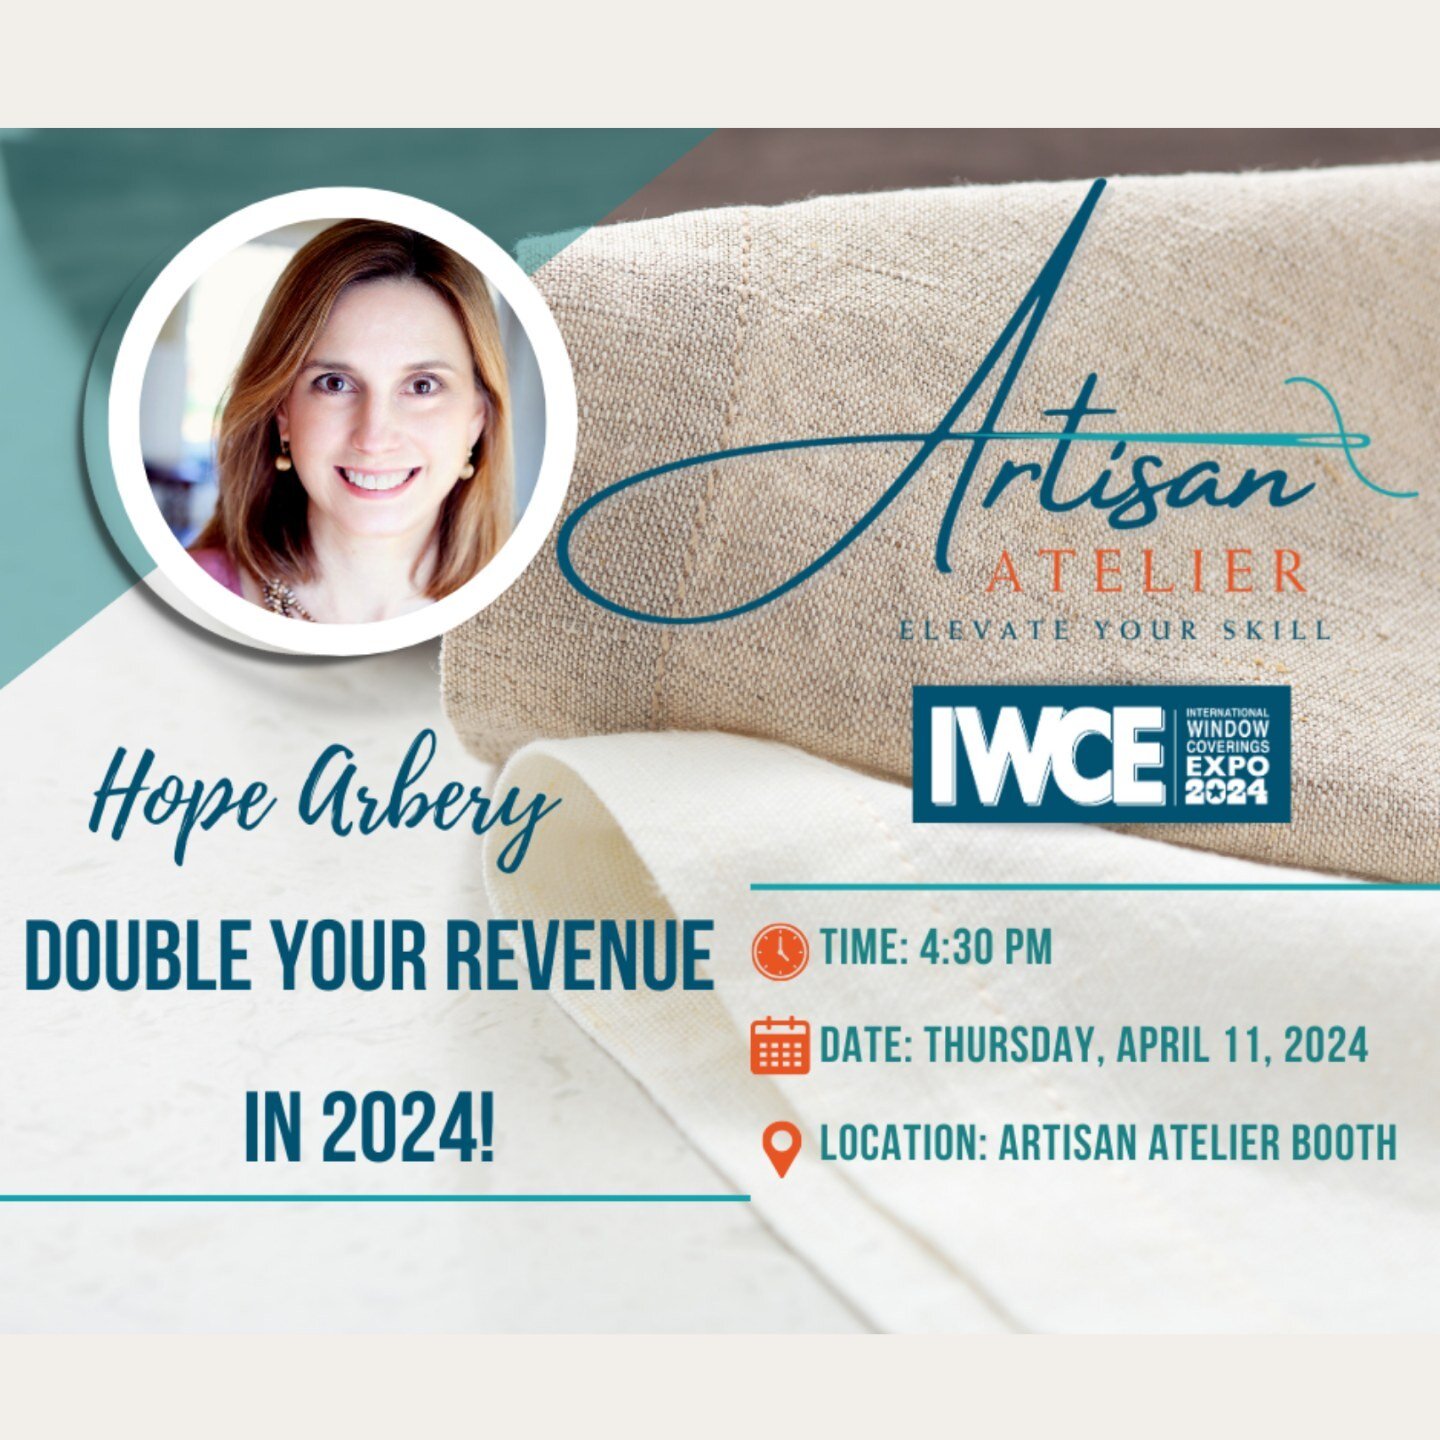 We hope to see you at @iwce_official in April! Hope will be speaking at @sandra_vansickle Artisan Atelier Booth on how to Double Your Revenue in 2024 on Thursday, April 11th at 4:30 pm. In addition, we will be an exhibitor at IWCE at booth #934. If y